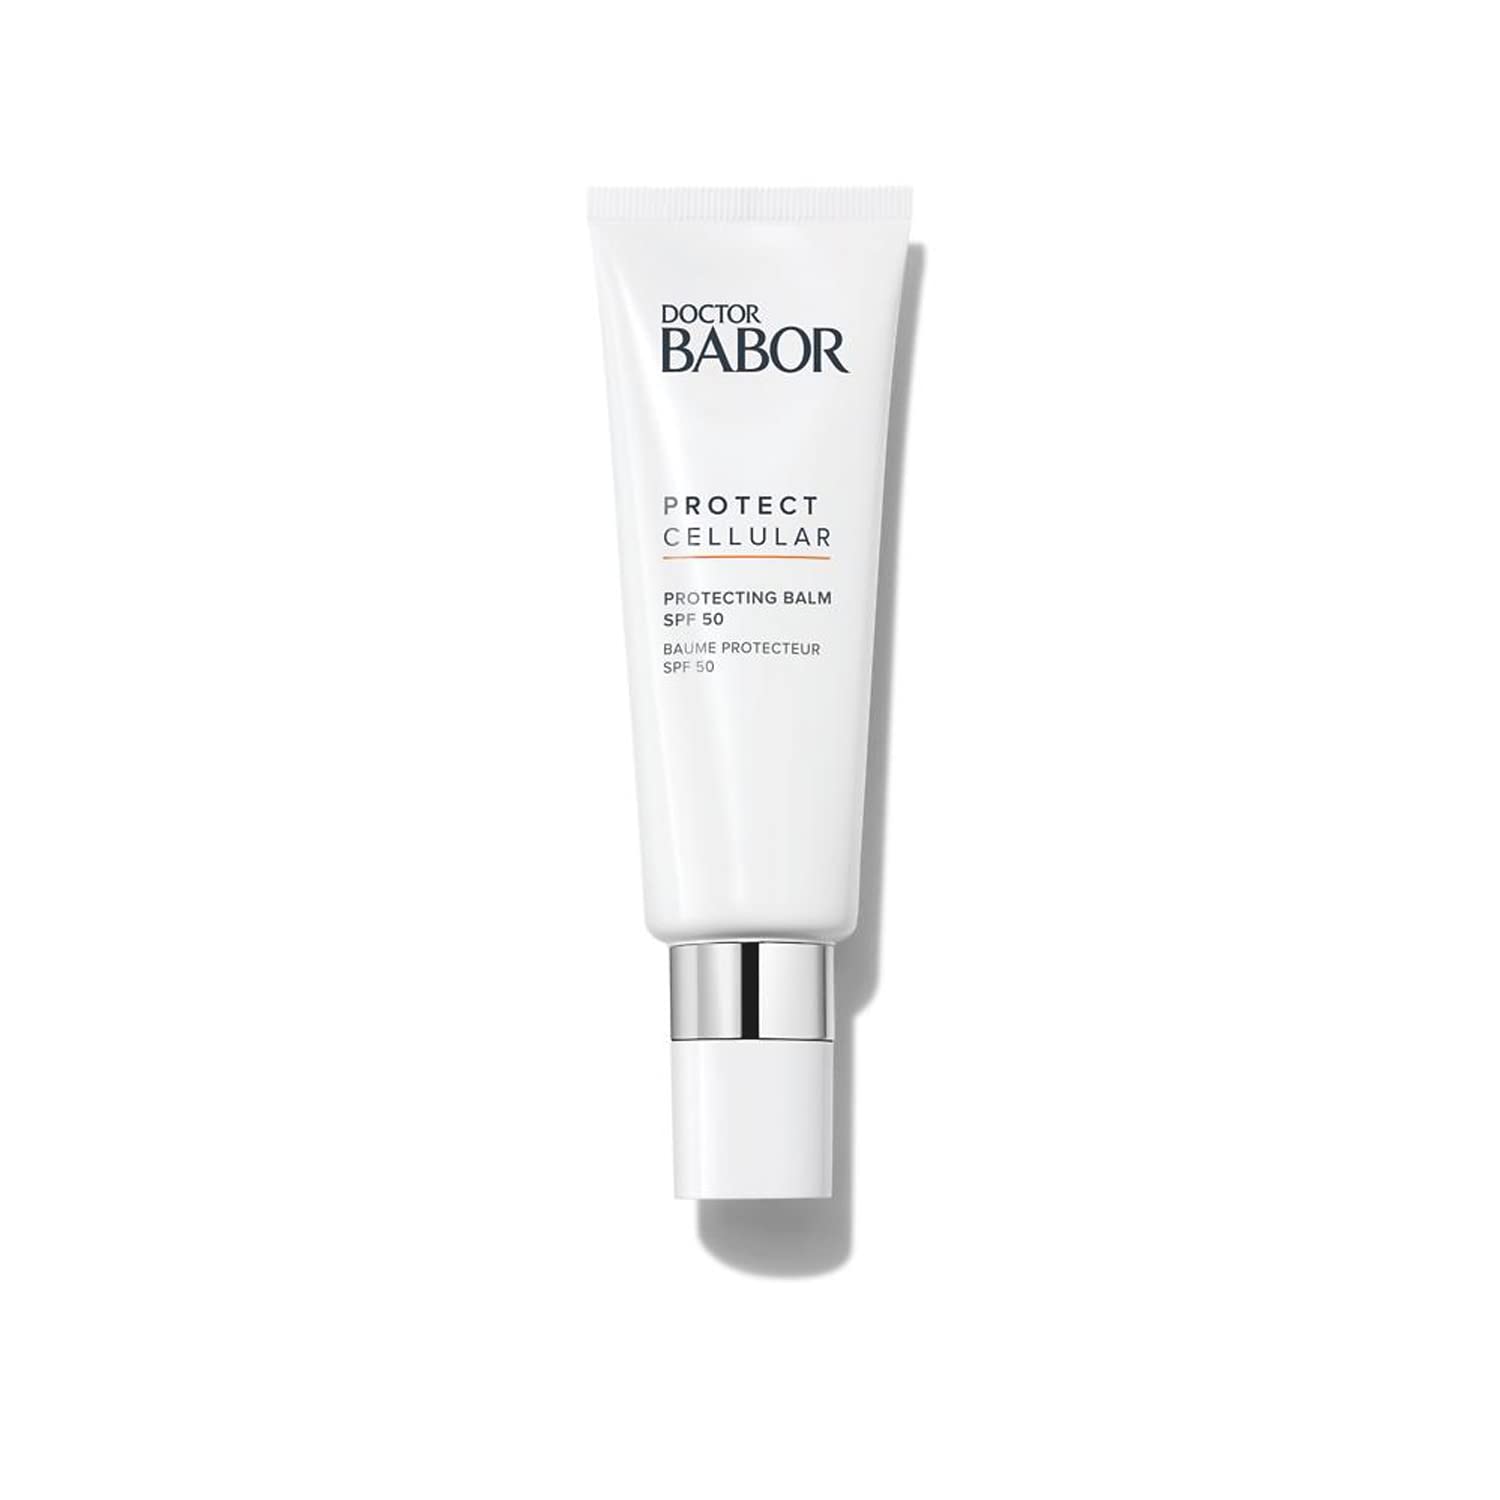 Doctor Babor Sun Cream SPF 50 for the Face, Fast Absorbing & Non-Adhesive Sun Protection Balm with Panthenol, Protecting Balm, 1 x 50 ml